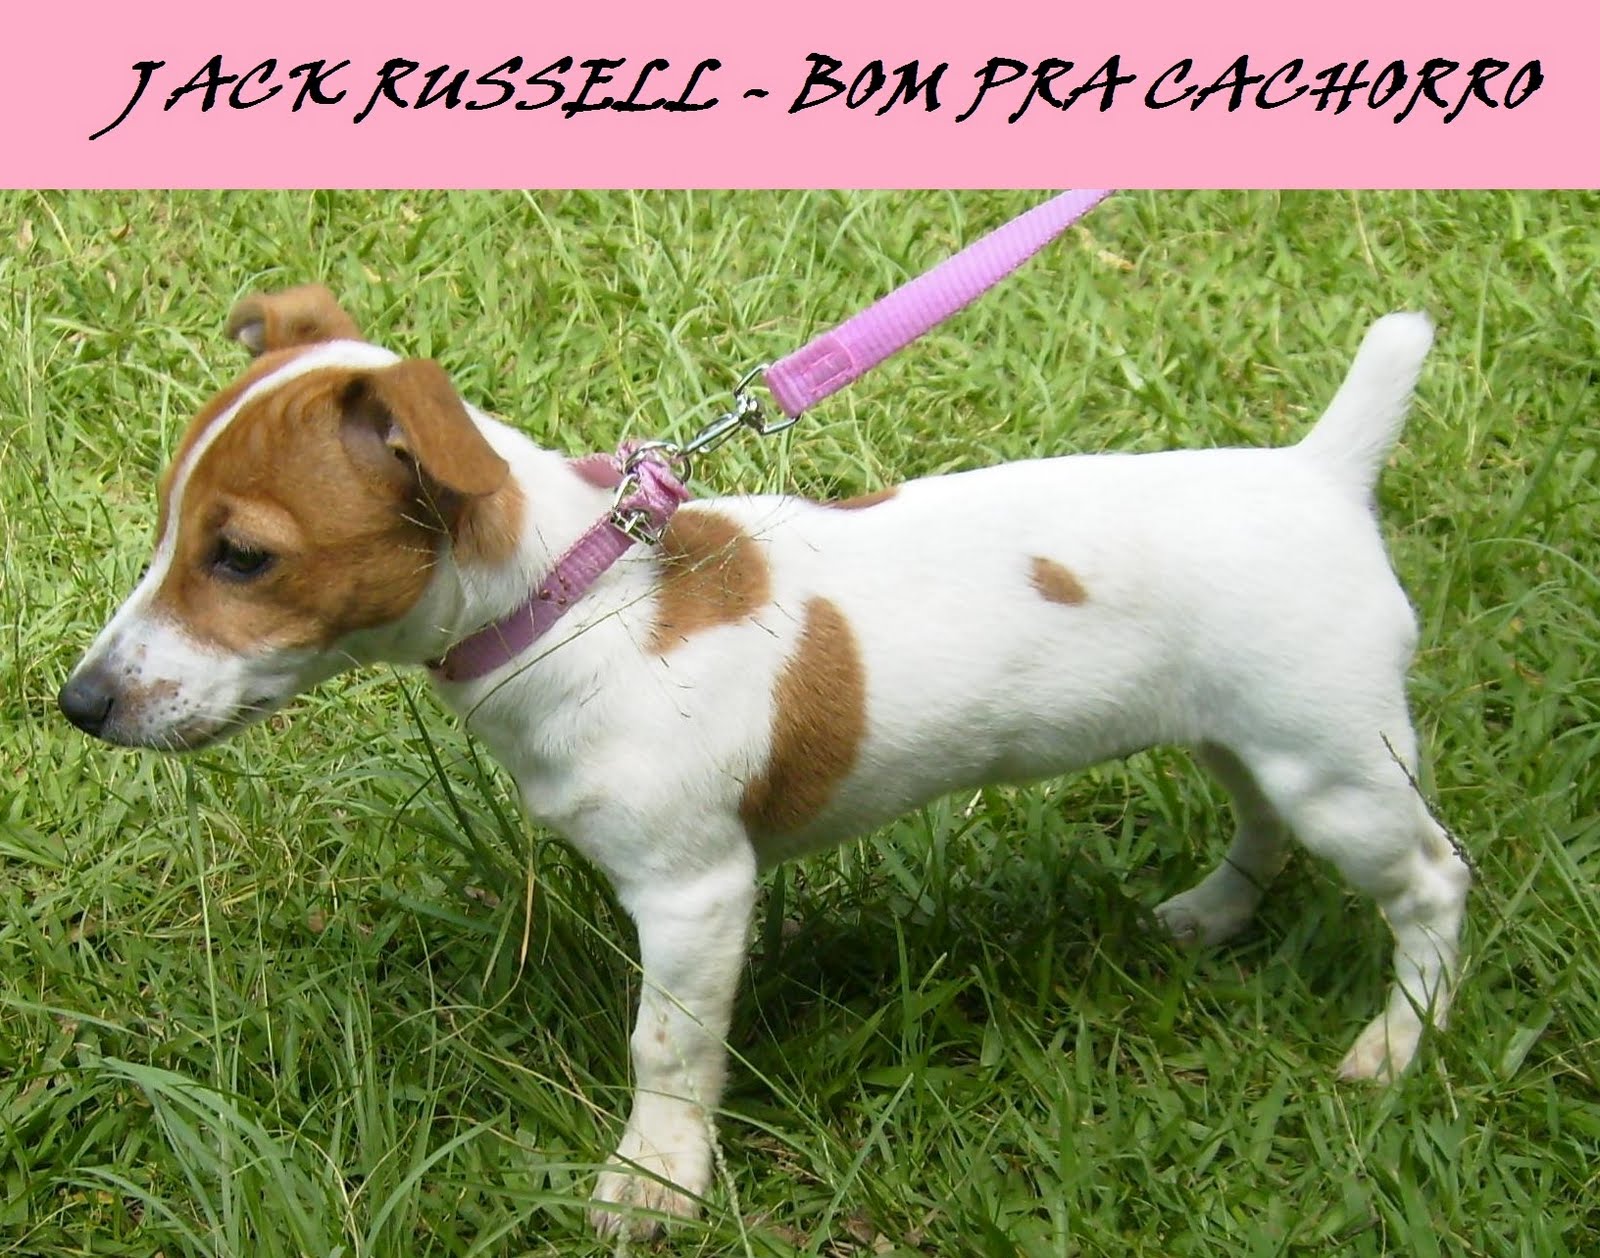 My Dog Jack Russell